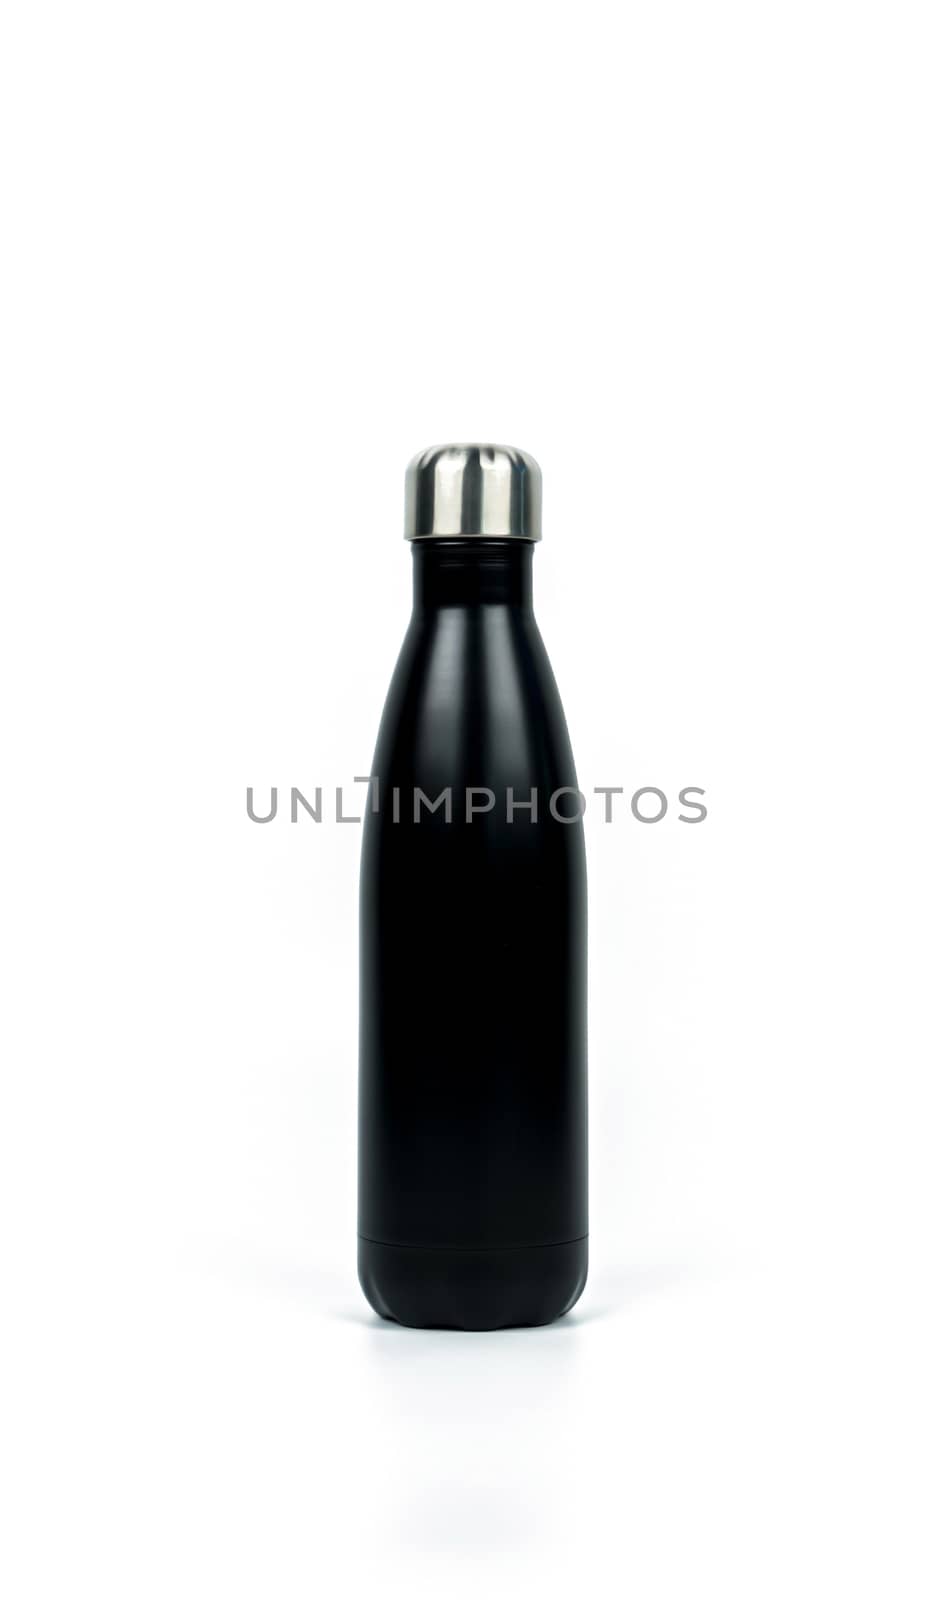 Black thermos bottle with sport design isolated on white background with copy space. Beverage container. Coffee and tea bottle. by Fahroni